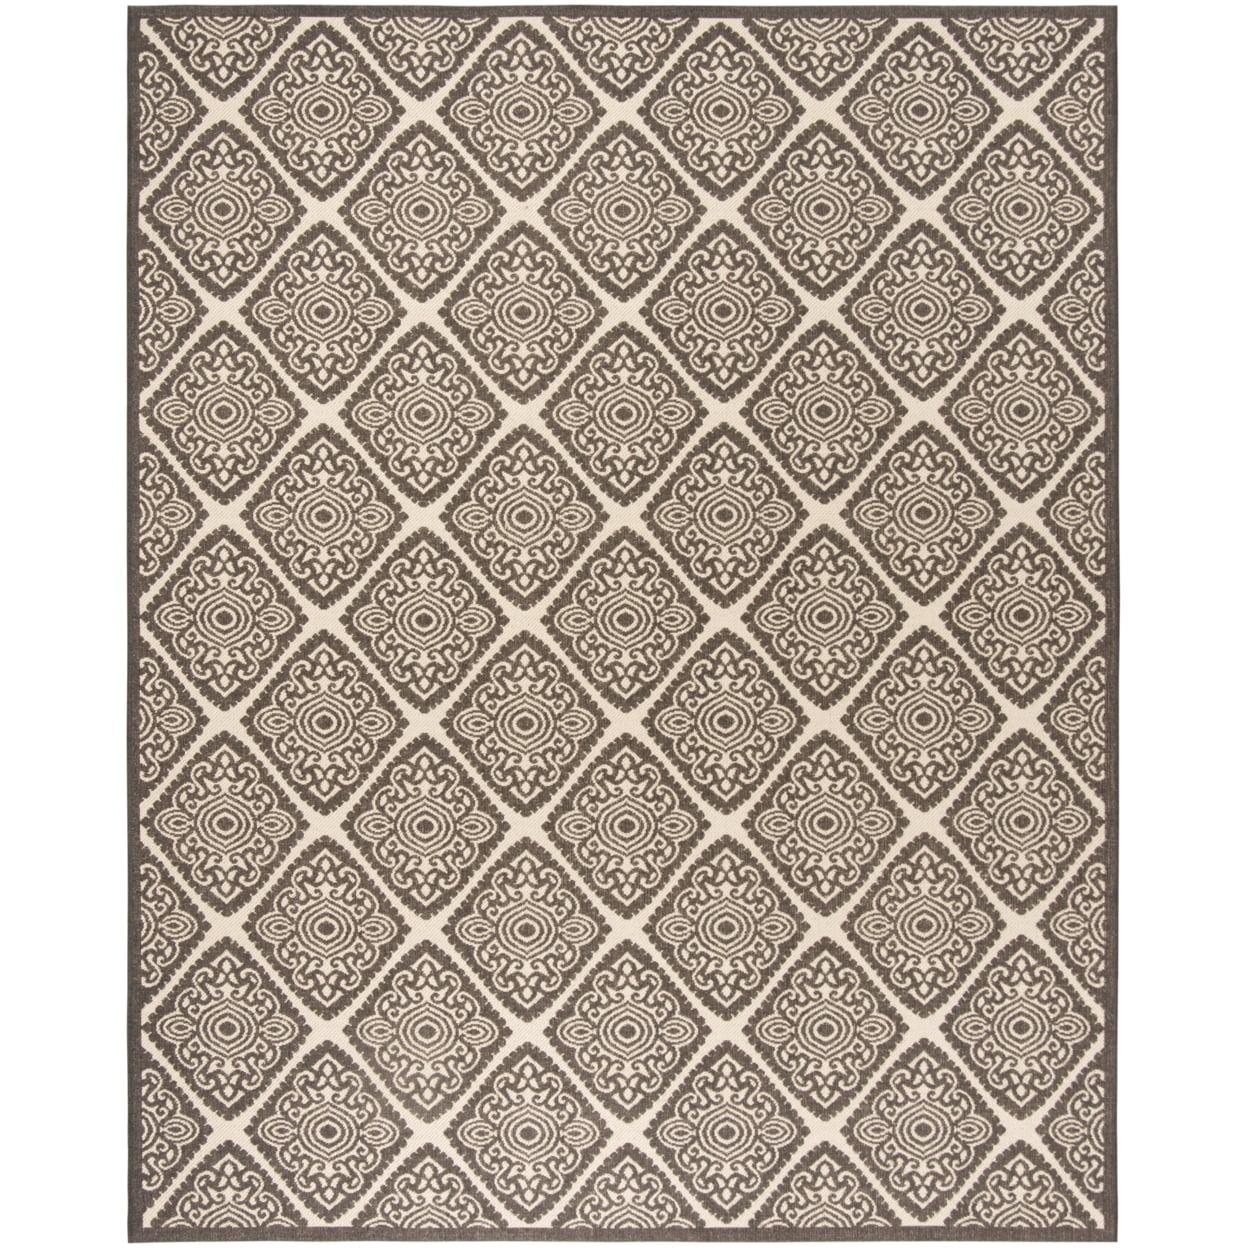 Reversible Cream/Brown Geometric Synthetic Area Rug 9' x 12'